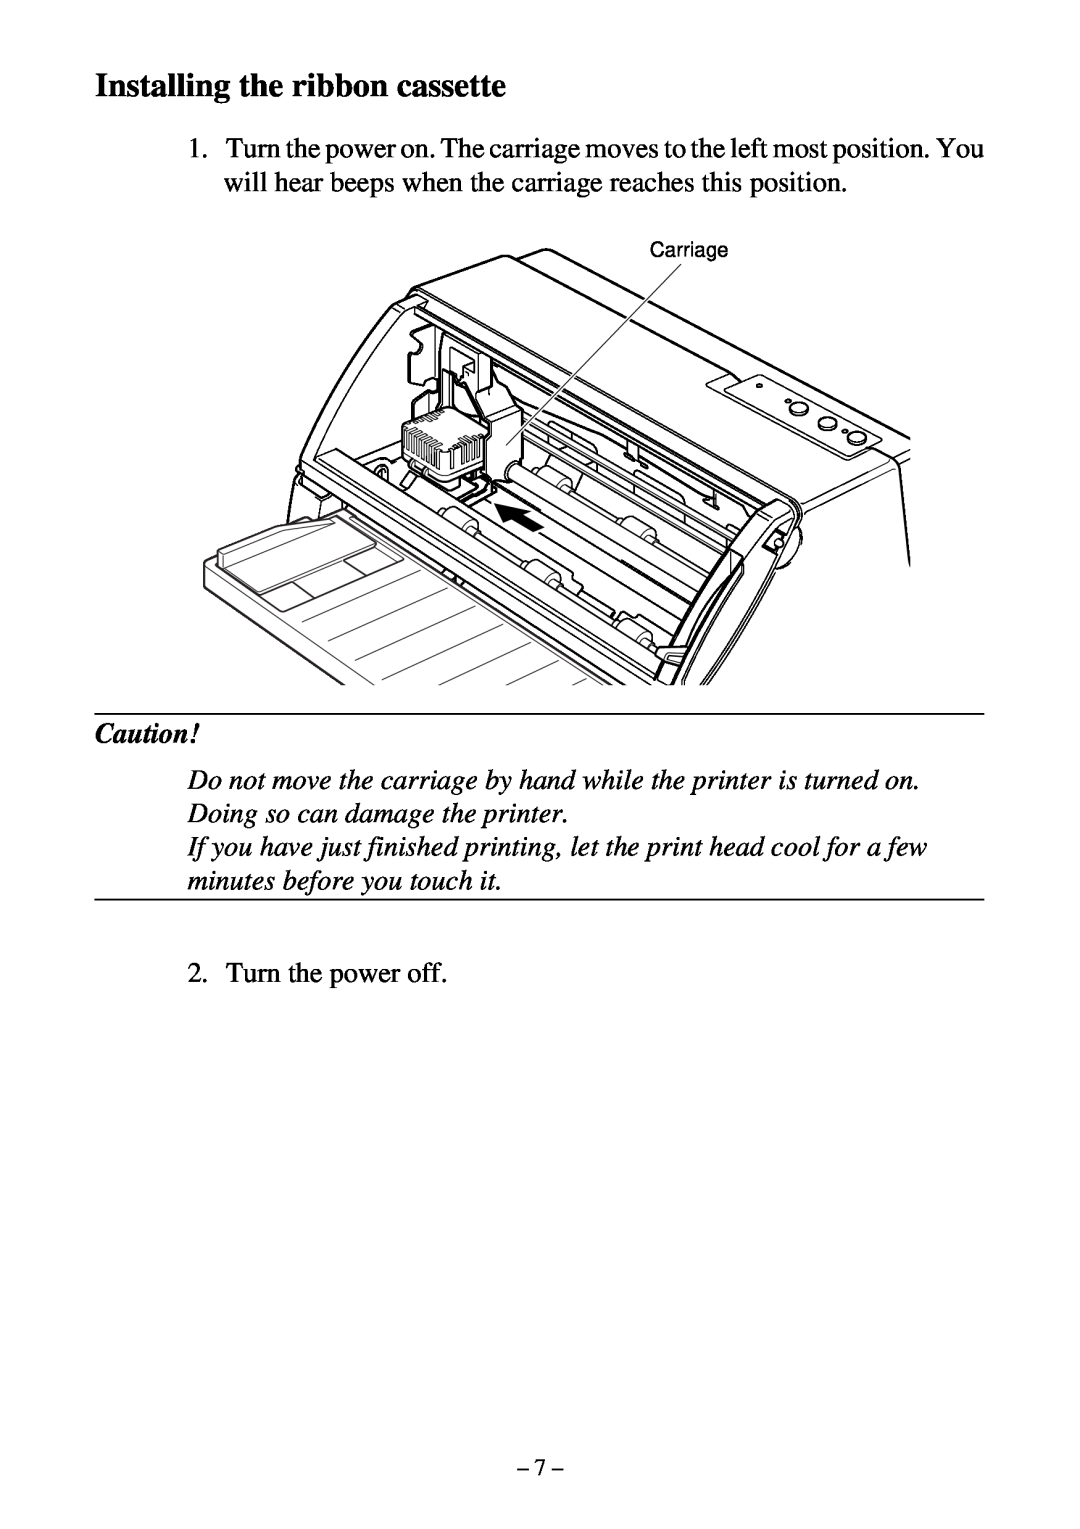 Star Micronics LC-500 user manual Installing the ribbon cassette, Turn the power off 